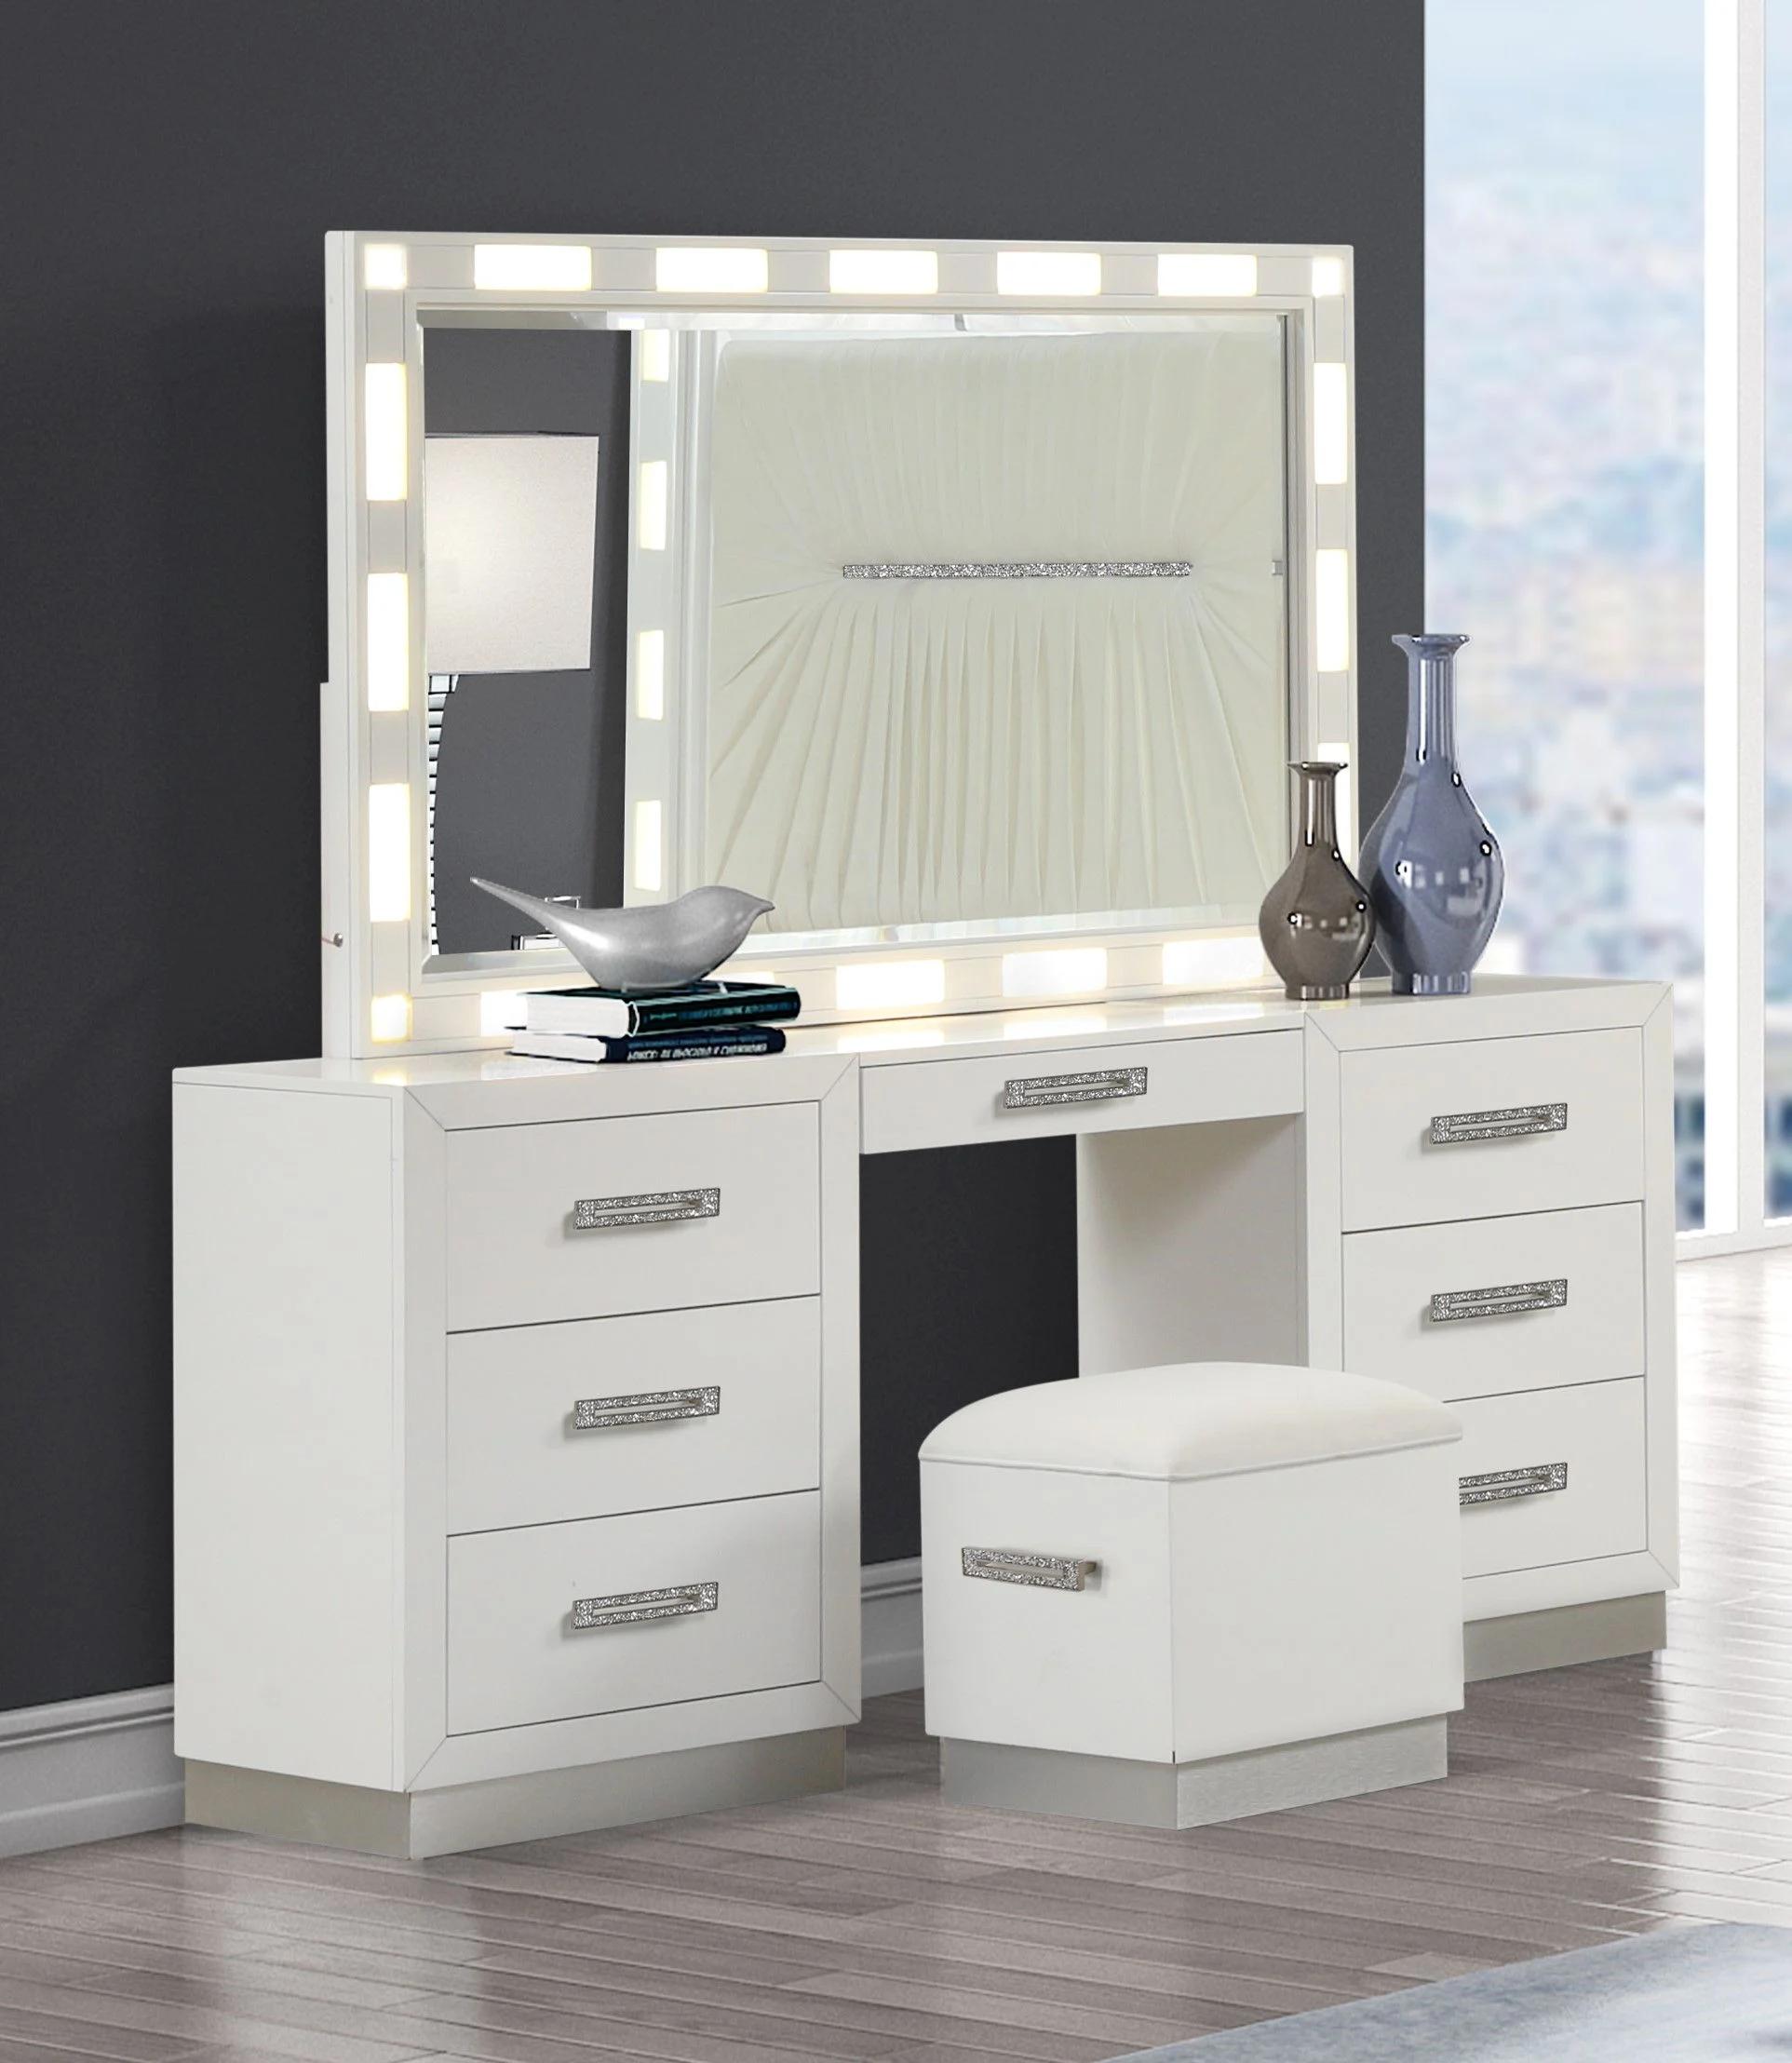 

    
Milky White Solid Wood Vanity Set COCO Galaxy Home Modern Contemporary
